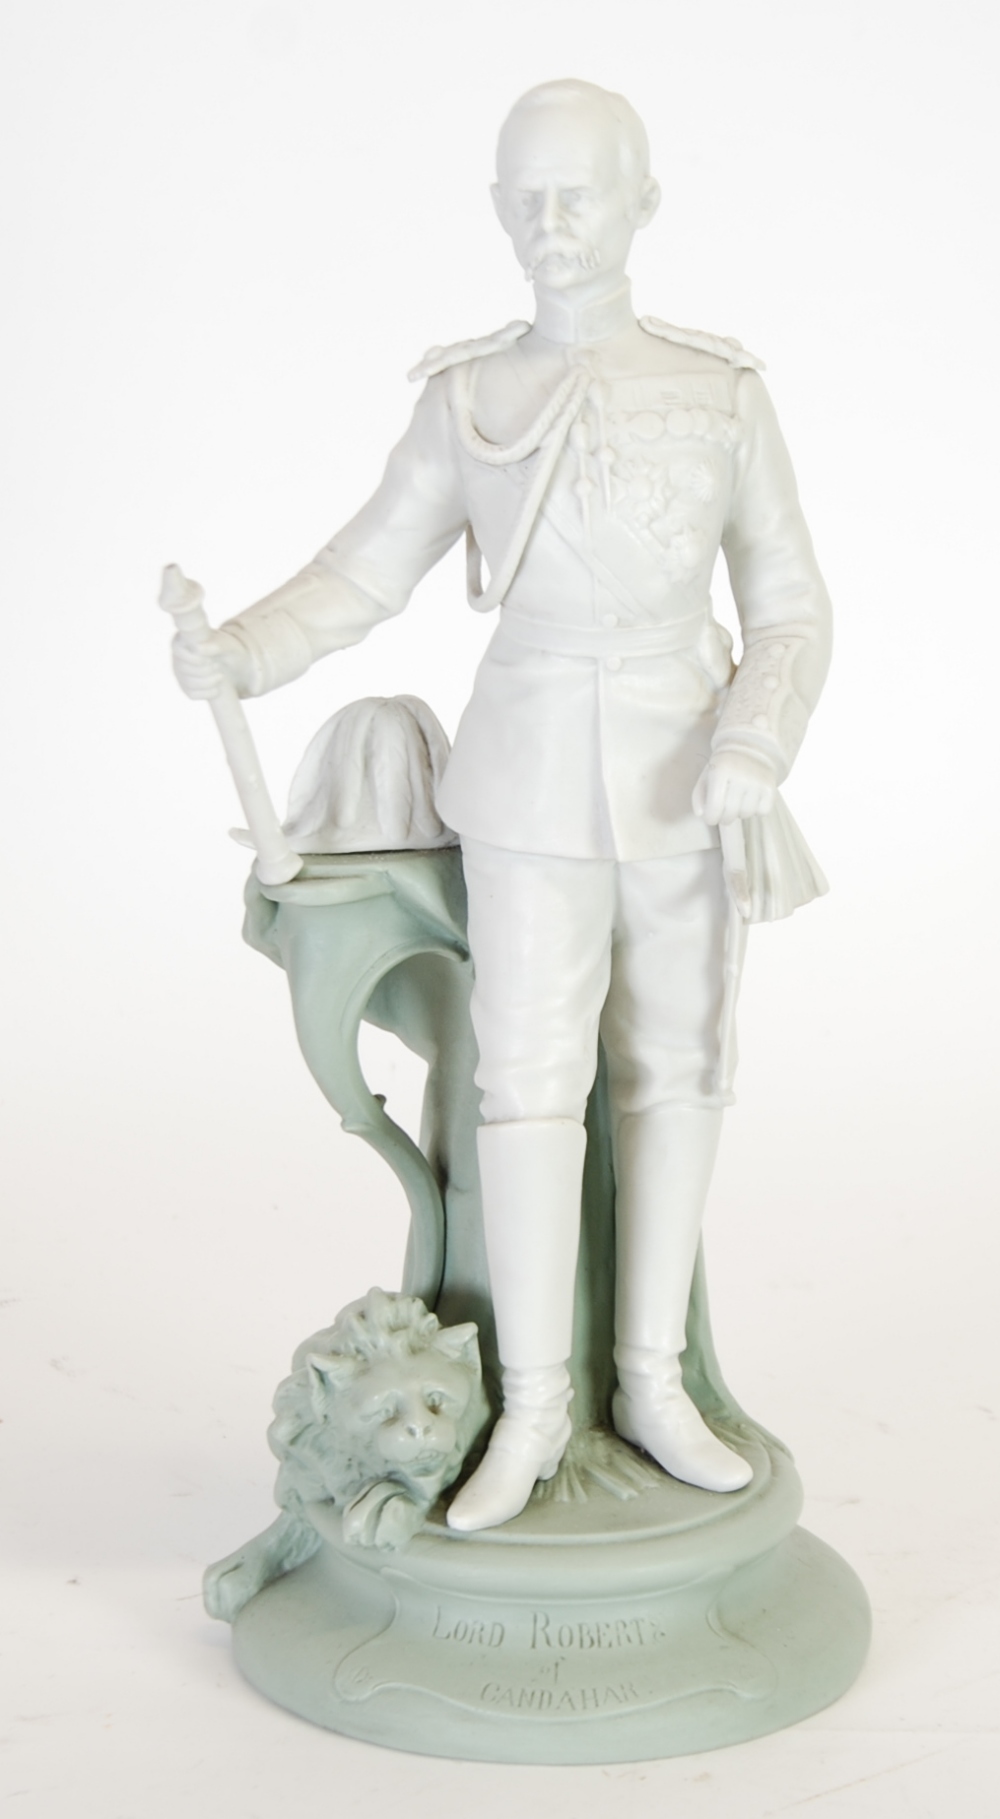 GERMAN GREEN AND WHITE PARIAN FIGURE OF LORD ROBERT OF GANDAHAR, modelled standing in military